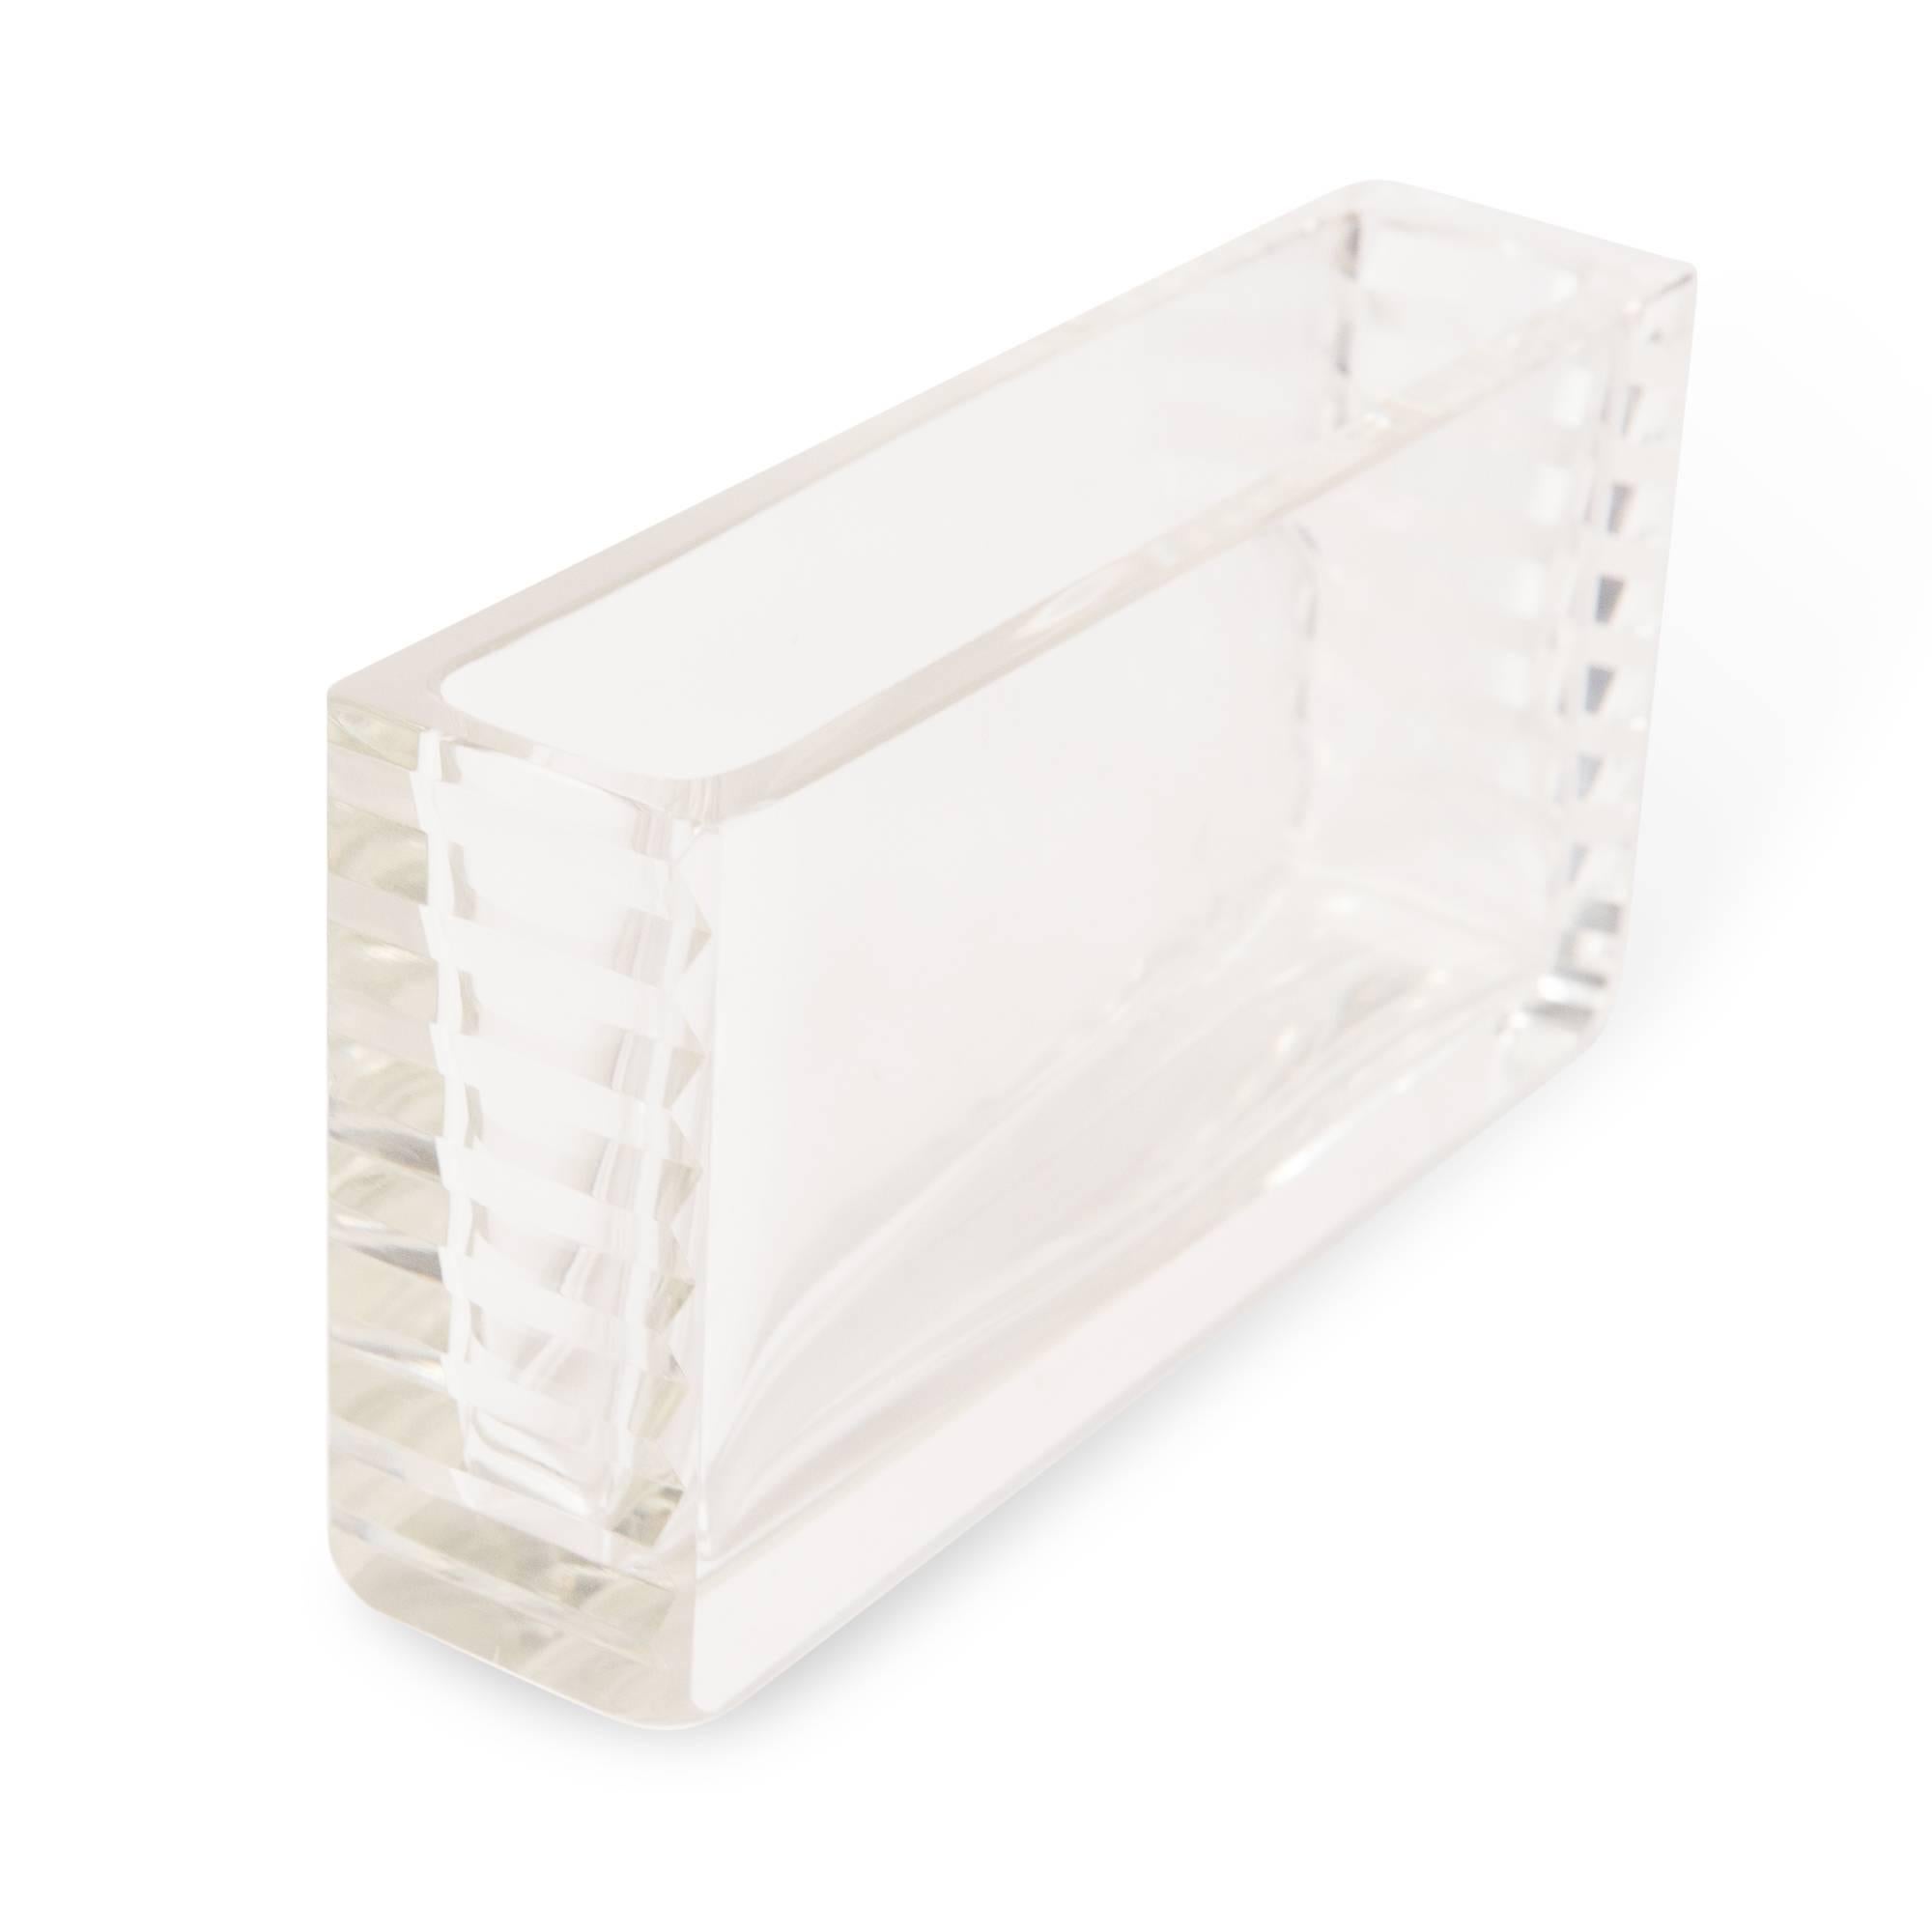 Mid-20th Century Narrow Clear Glass Rectangular Vase by Jean Luce, circa 1930 For Sale